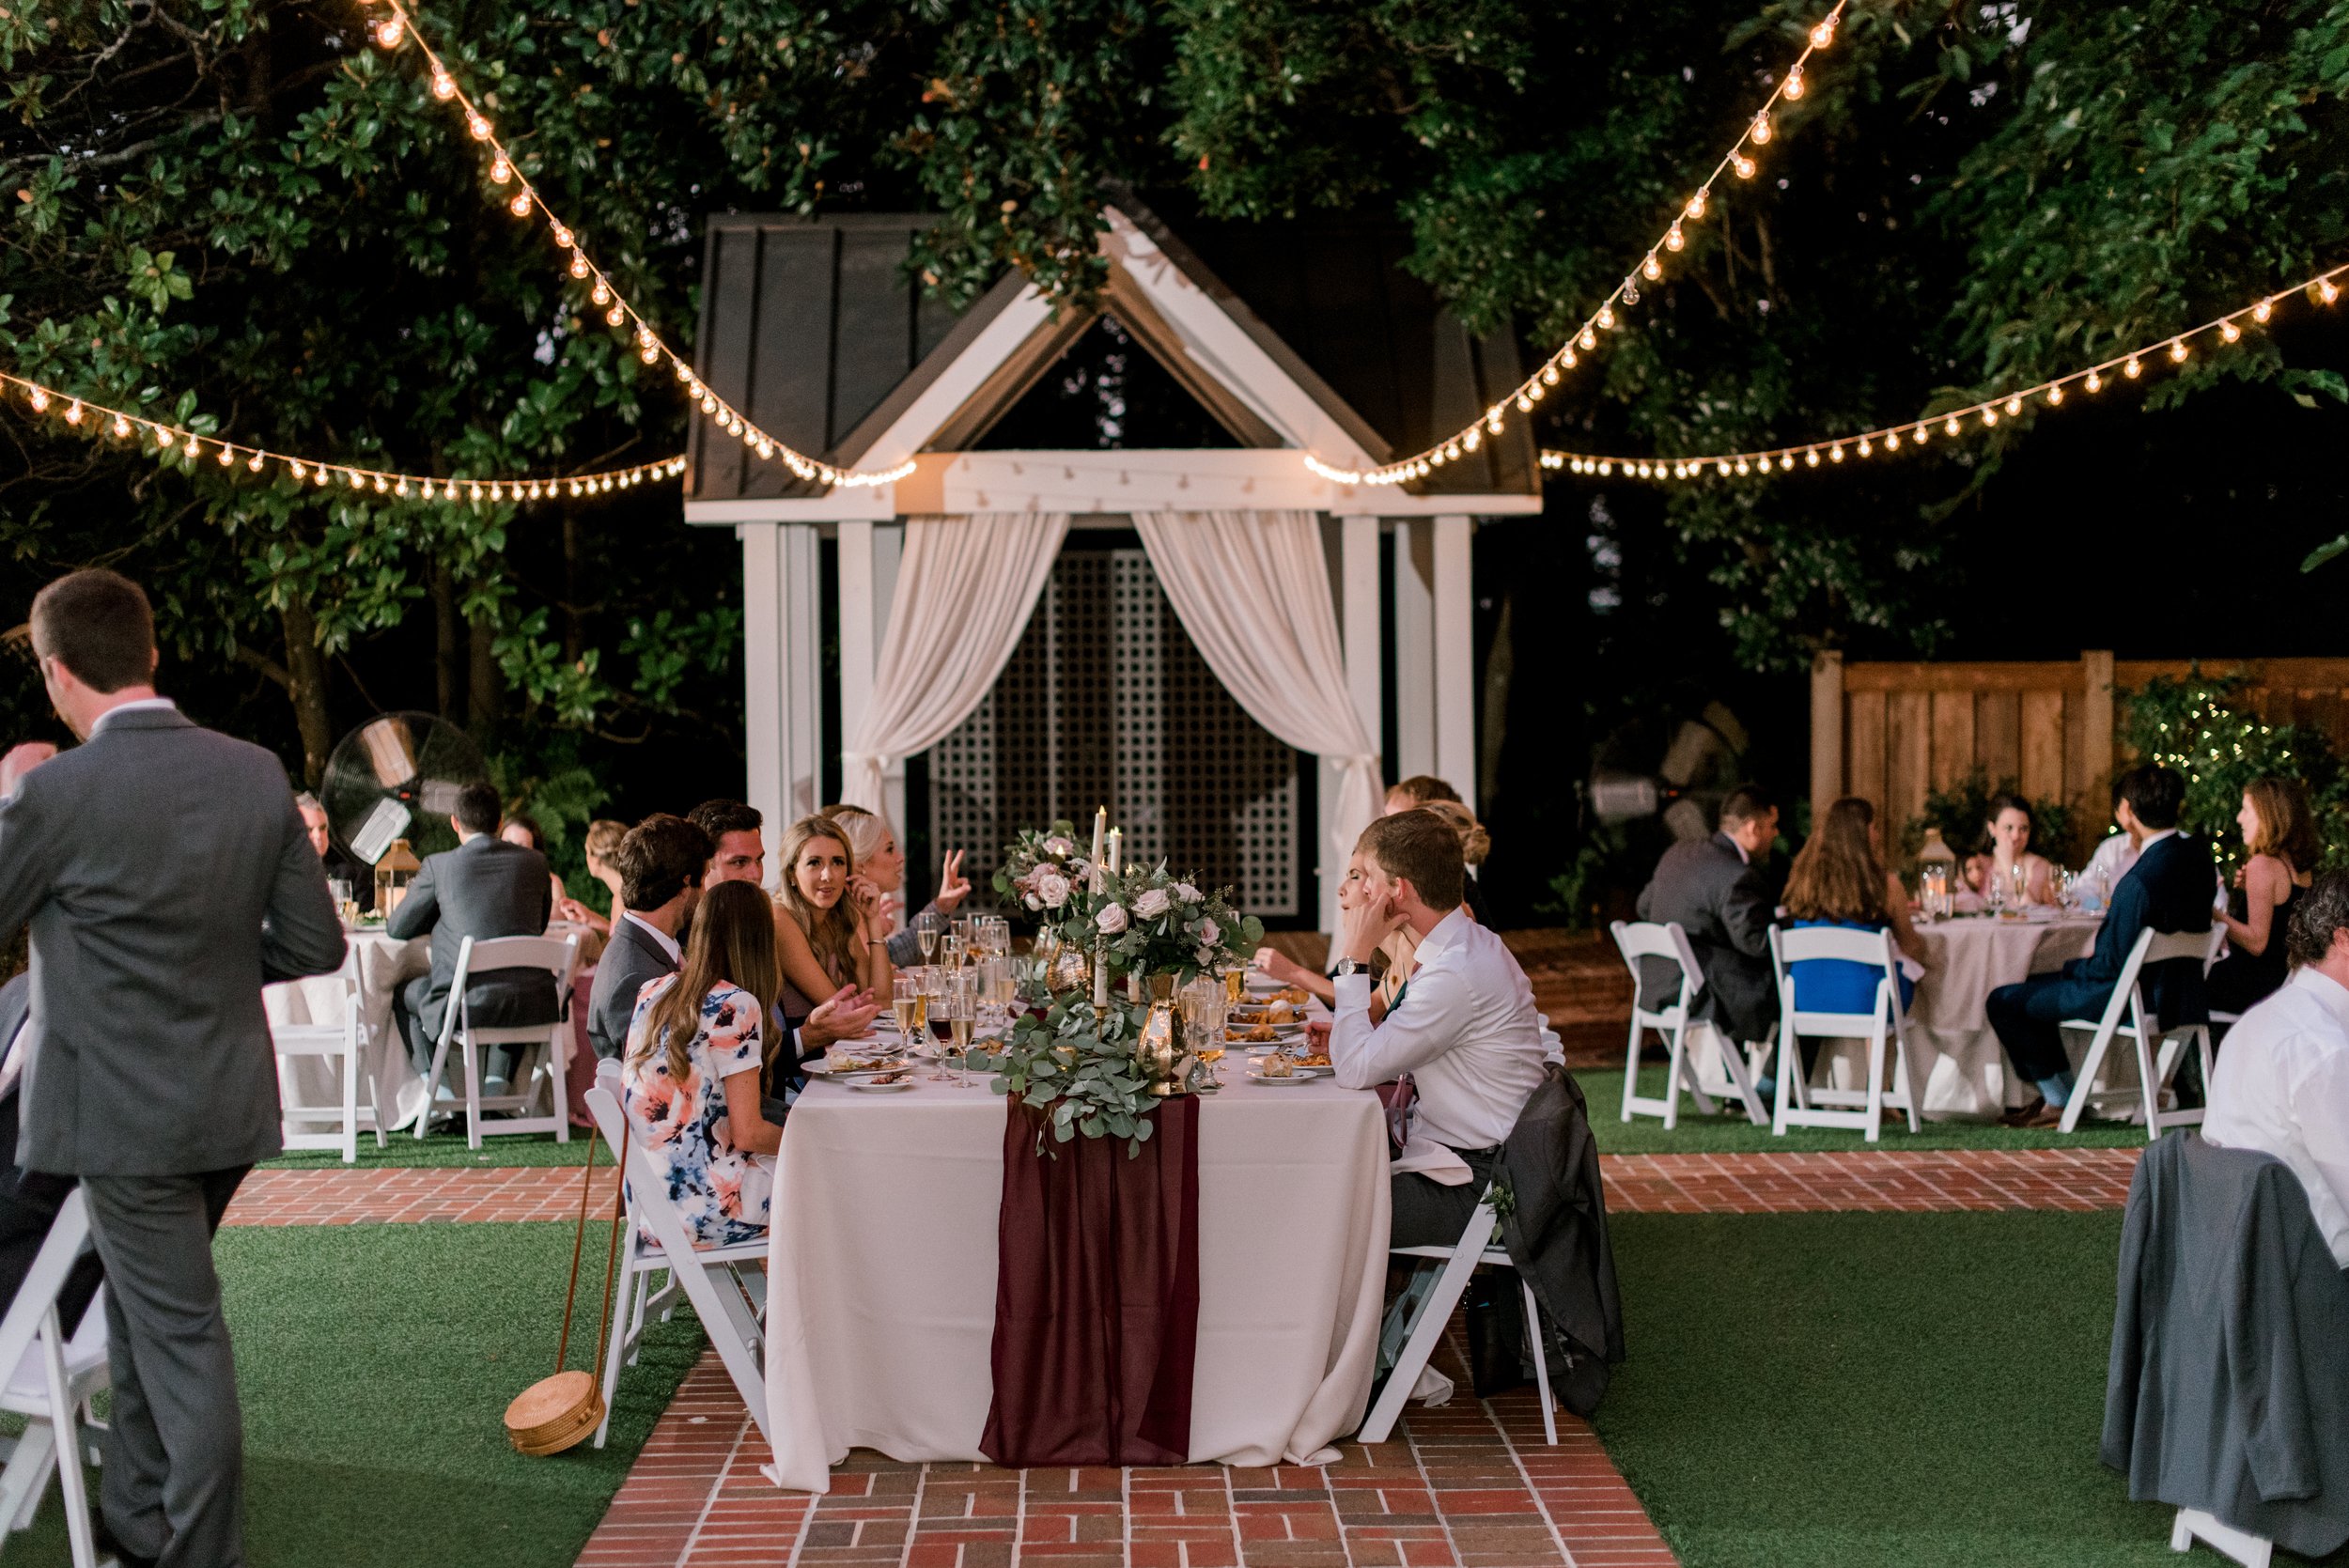   The Courtyard at Flint Hill is the perfect place for the outdoor wedding of your dreams! With a spectacular amount of space, the Courtyard can host a large dinner crowd, with option to easily transition inside to the ballroom. Photos by   Audrey Gr